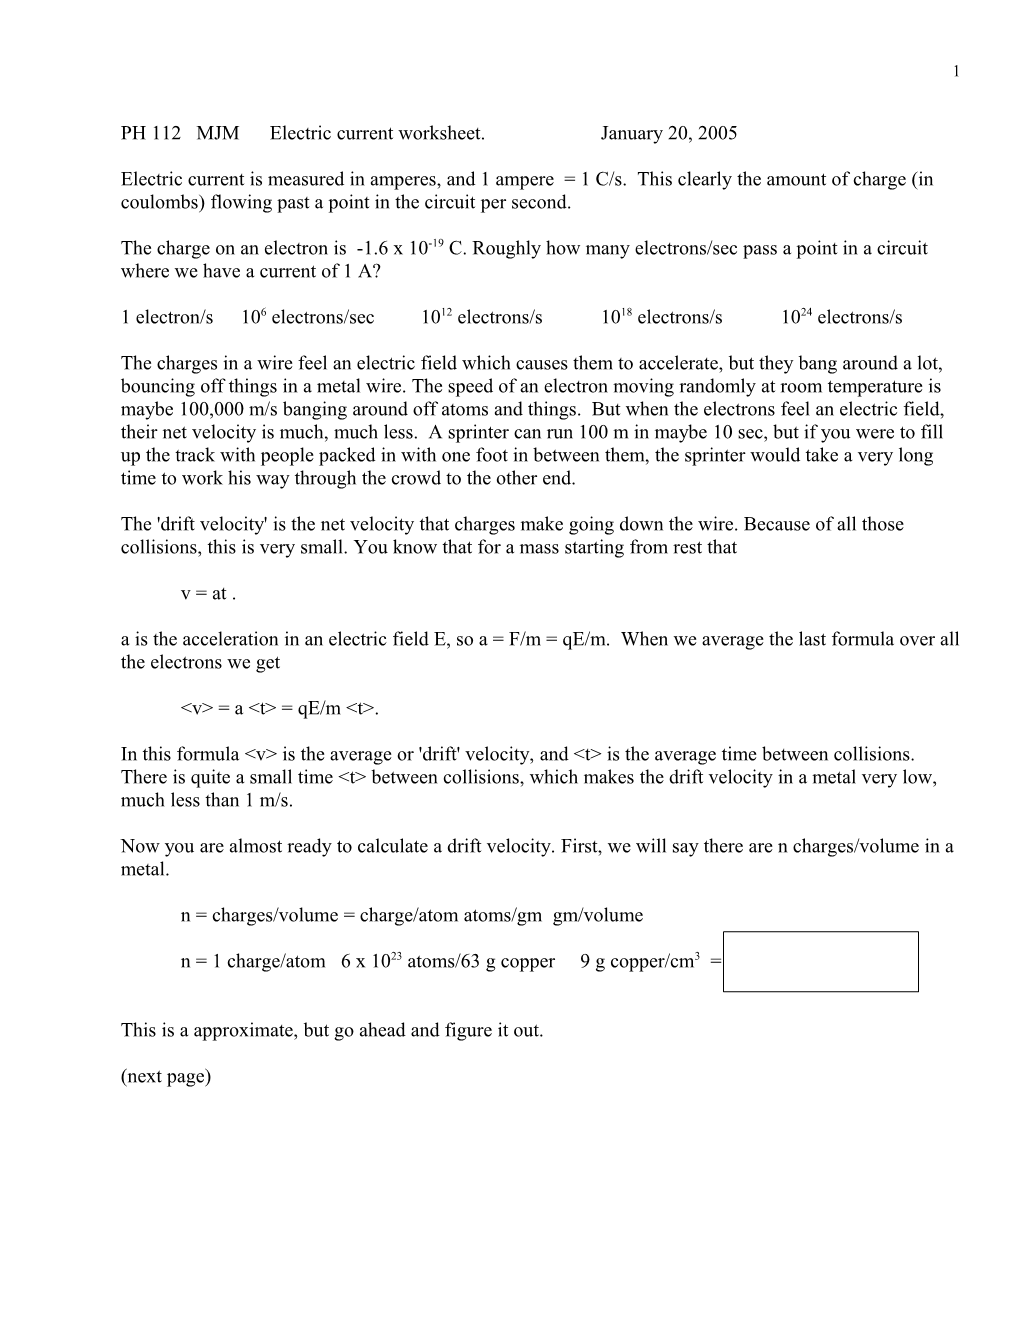 PH 112 Electric Current Worksheet